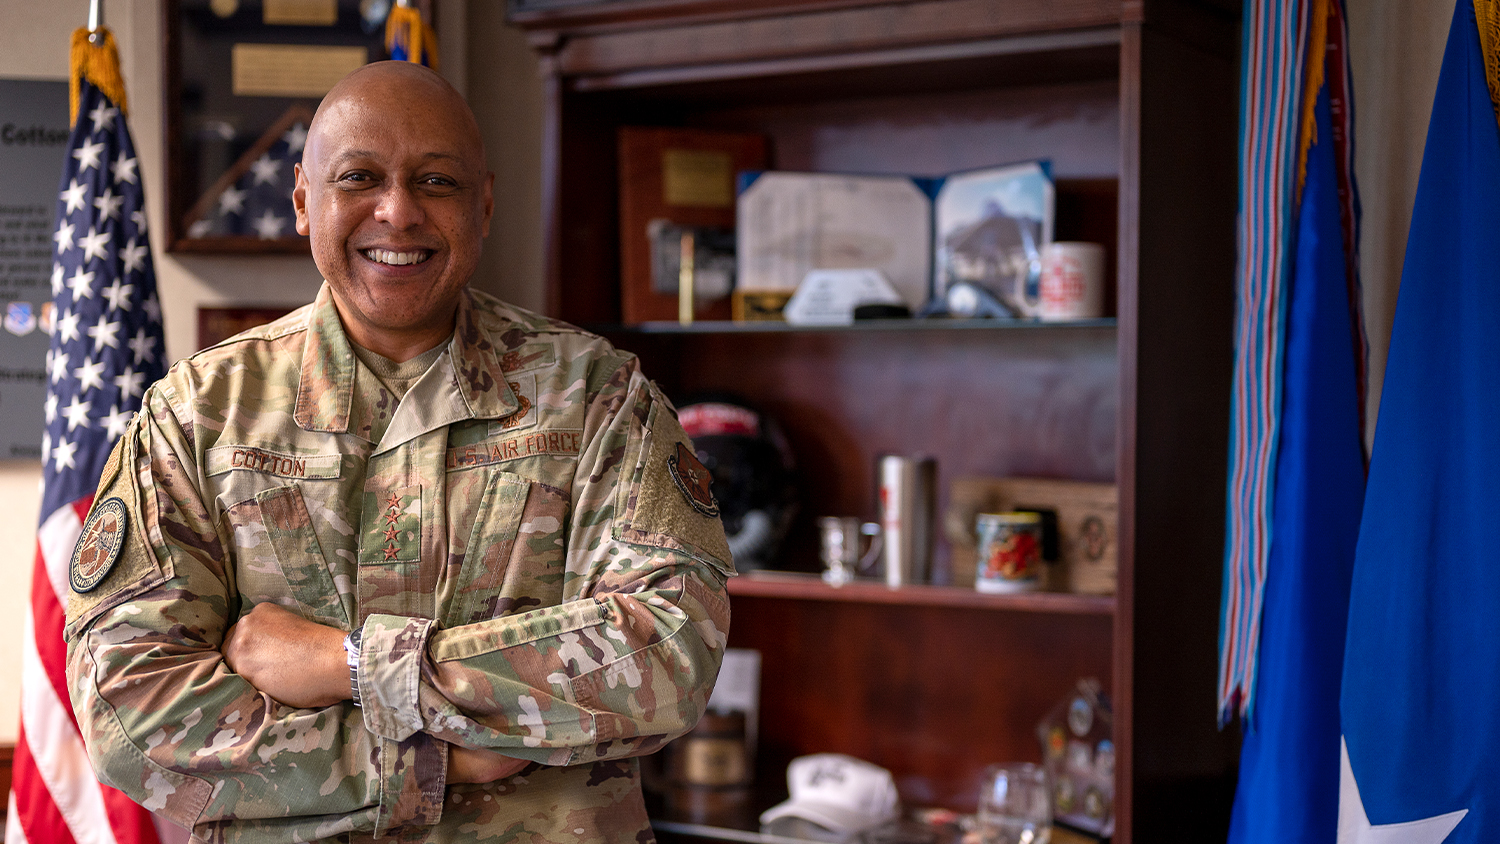 Gen Anthony Cotton in his military uniform and standing with his arms crossed in his office